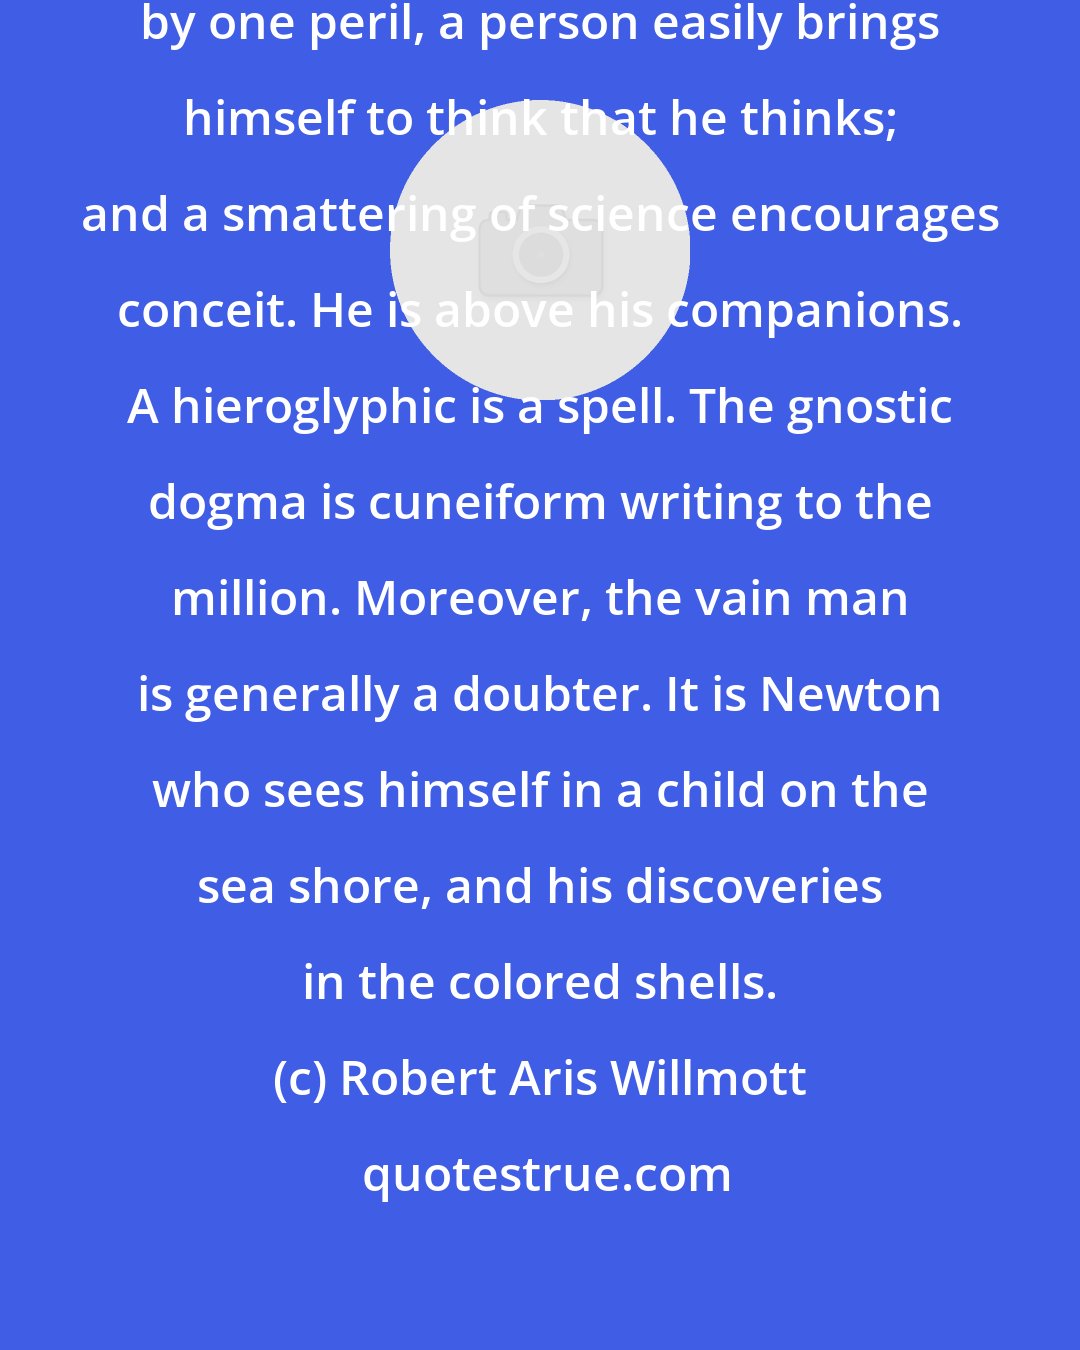 Robert Aris Willmott: Philosophical studies are beset by one peril, a person easily brings himself to think that he thinks; and a smattering of science encourages conceit. He is above his companions. A hieroglyphic is a spell. The gnostic dogma is cuneiform writing to the million. Moreover, the vain man is generally a doubter. It is Newton who sees himself in a child on the sea shore, and his discoveries in the colored shells.